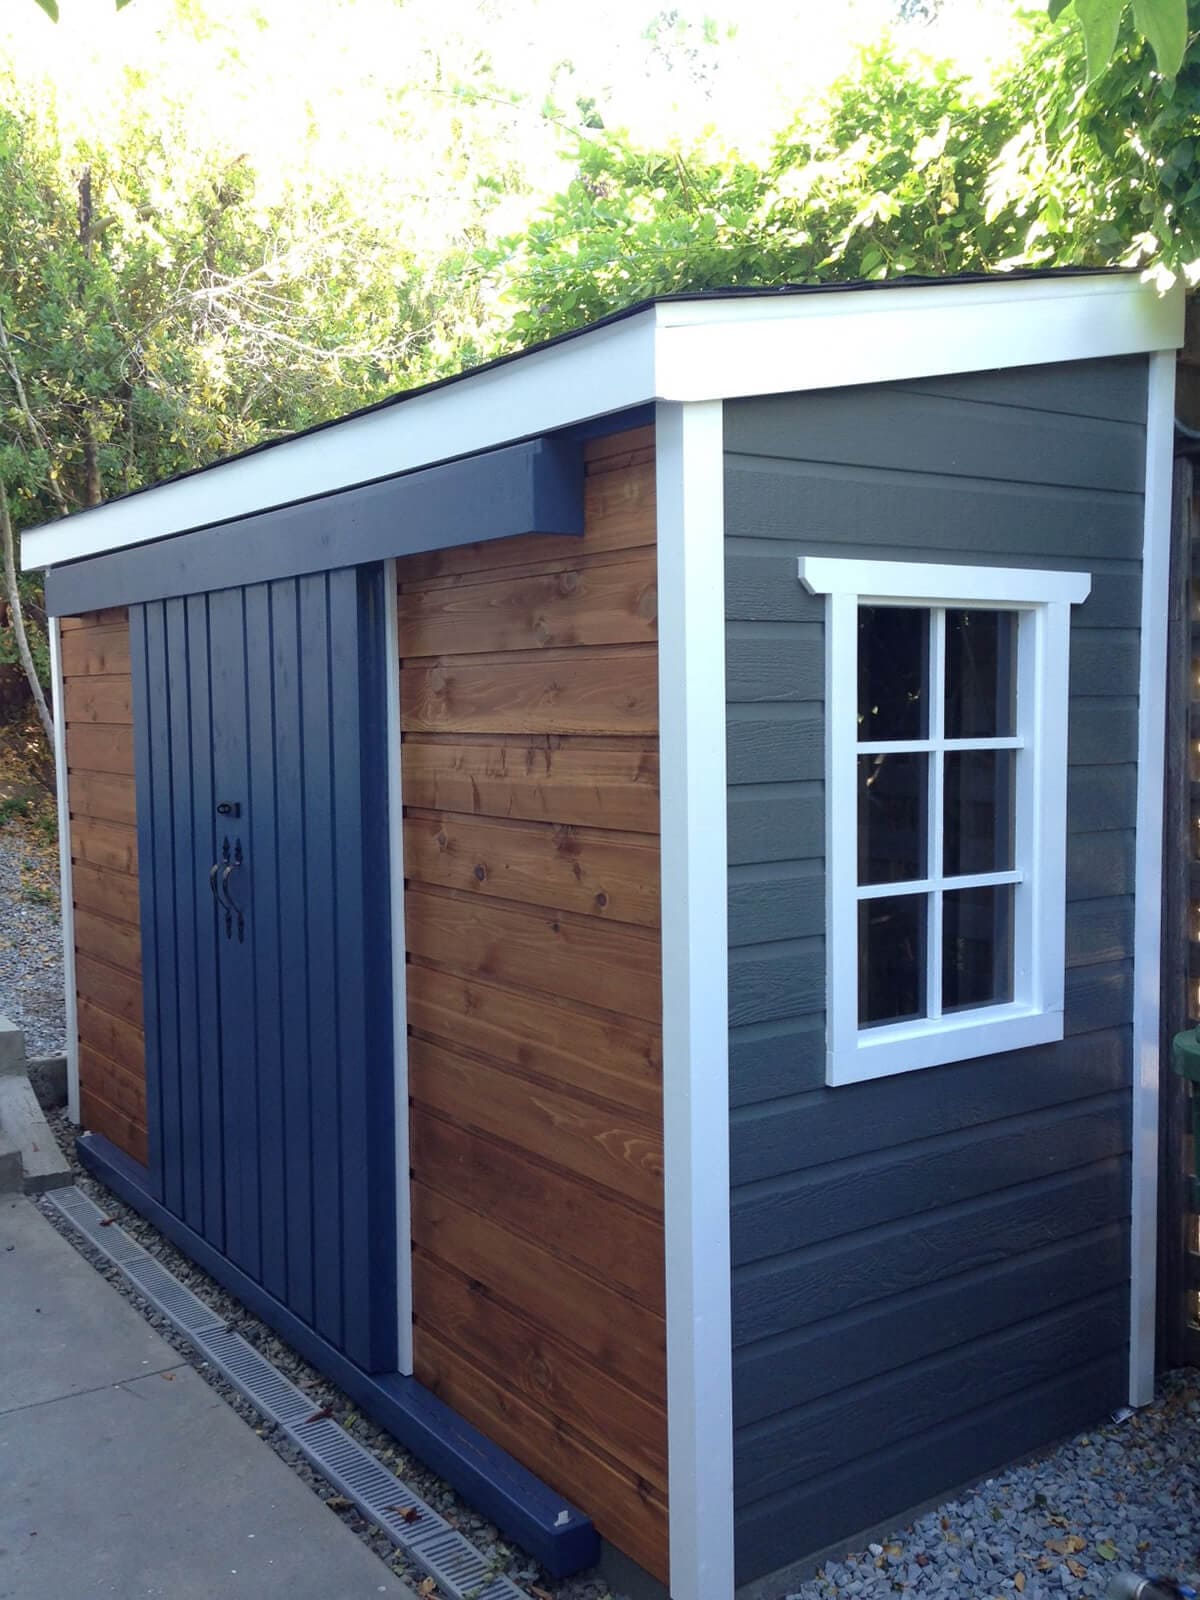 Simphome.com best small storage shed projects ideas and designs for 2020 throughout 10 small garden shed ideas awesome and also attractive